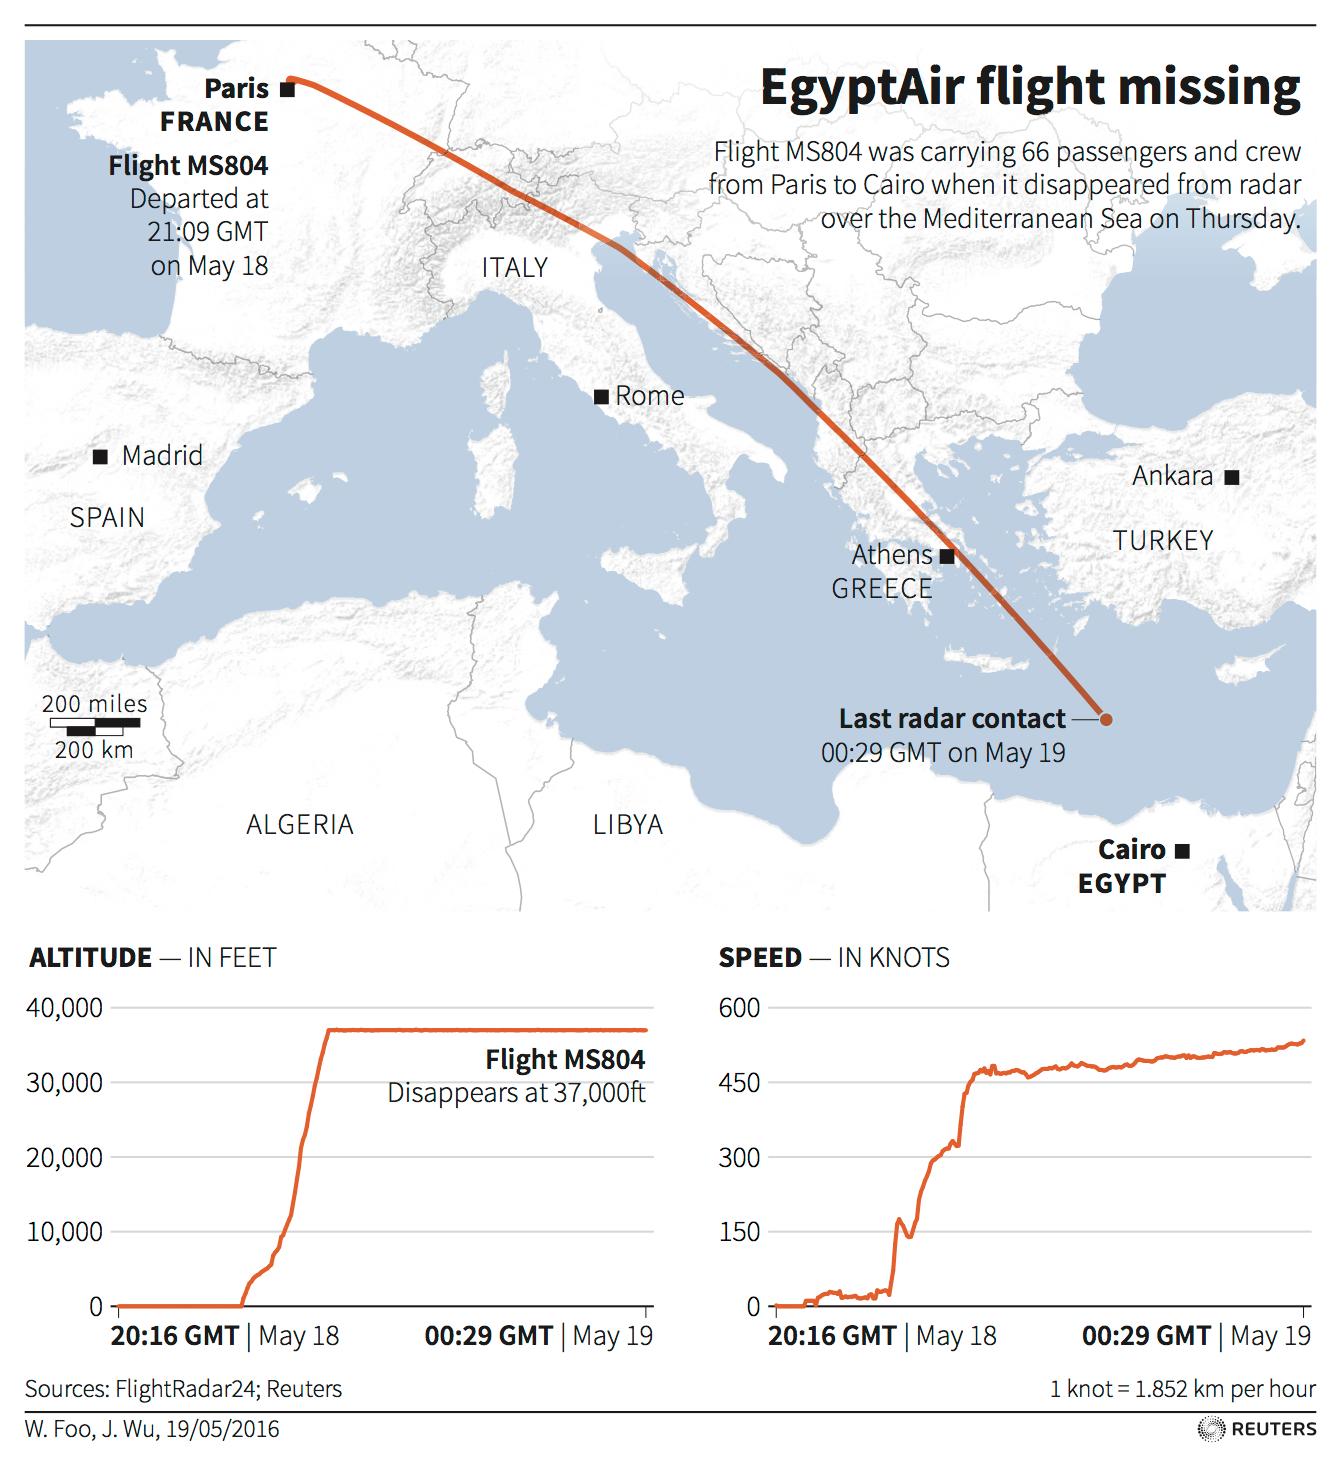 Map locating the flight path of EgyptAir Flight MS804 which disappeared over the Mediterranean Sea en route from Paris to Cairo.